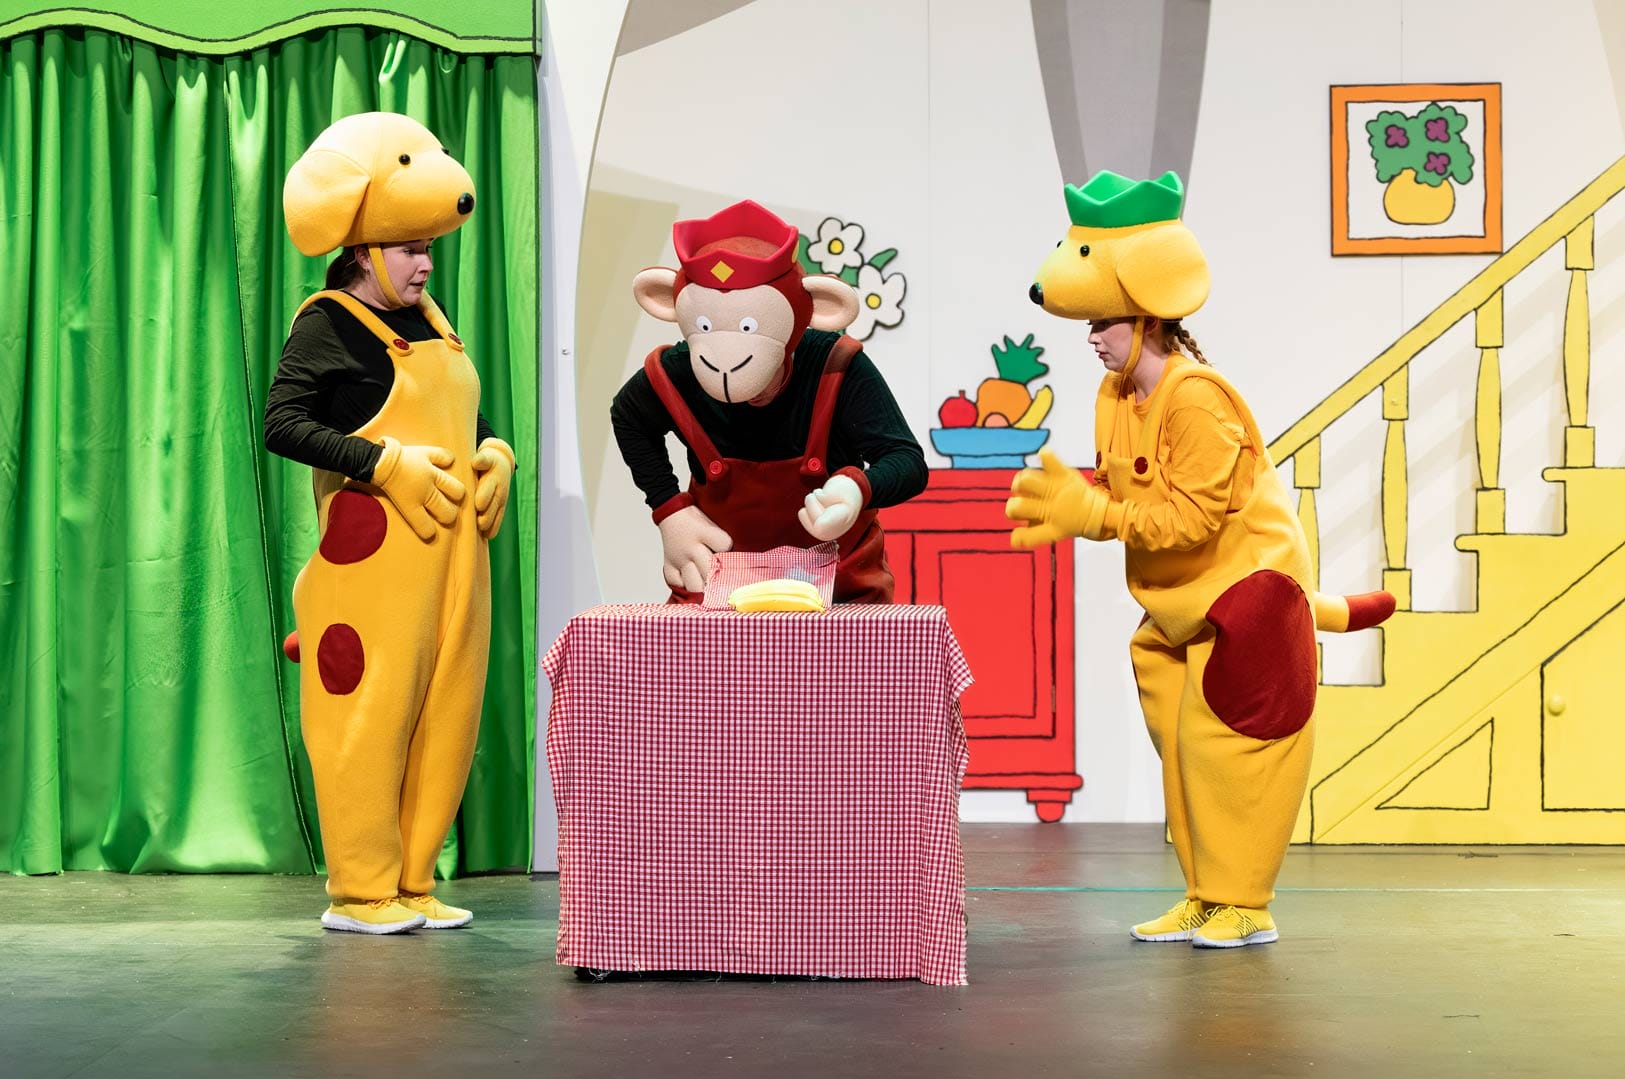 The monkey and spots are looking at the bananas on the kitchen table on stage.